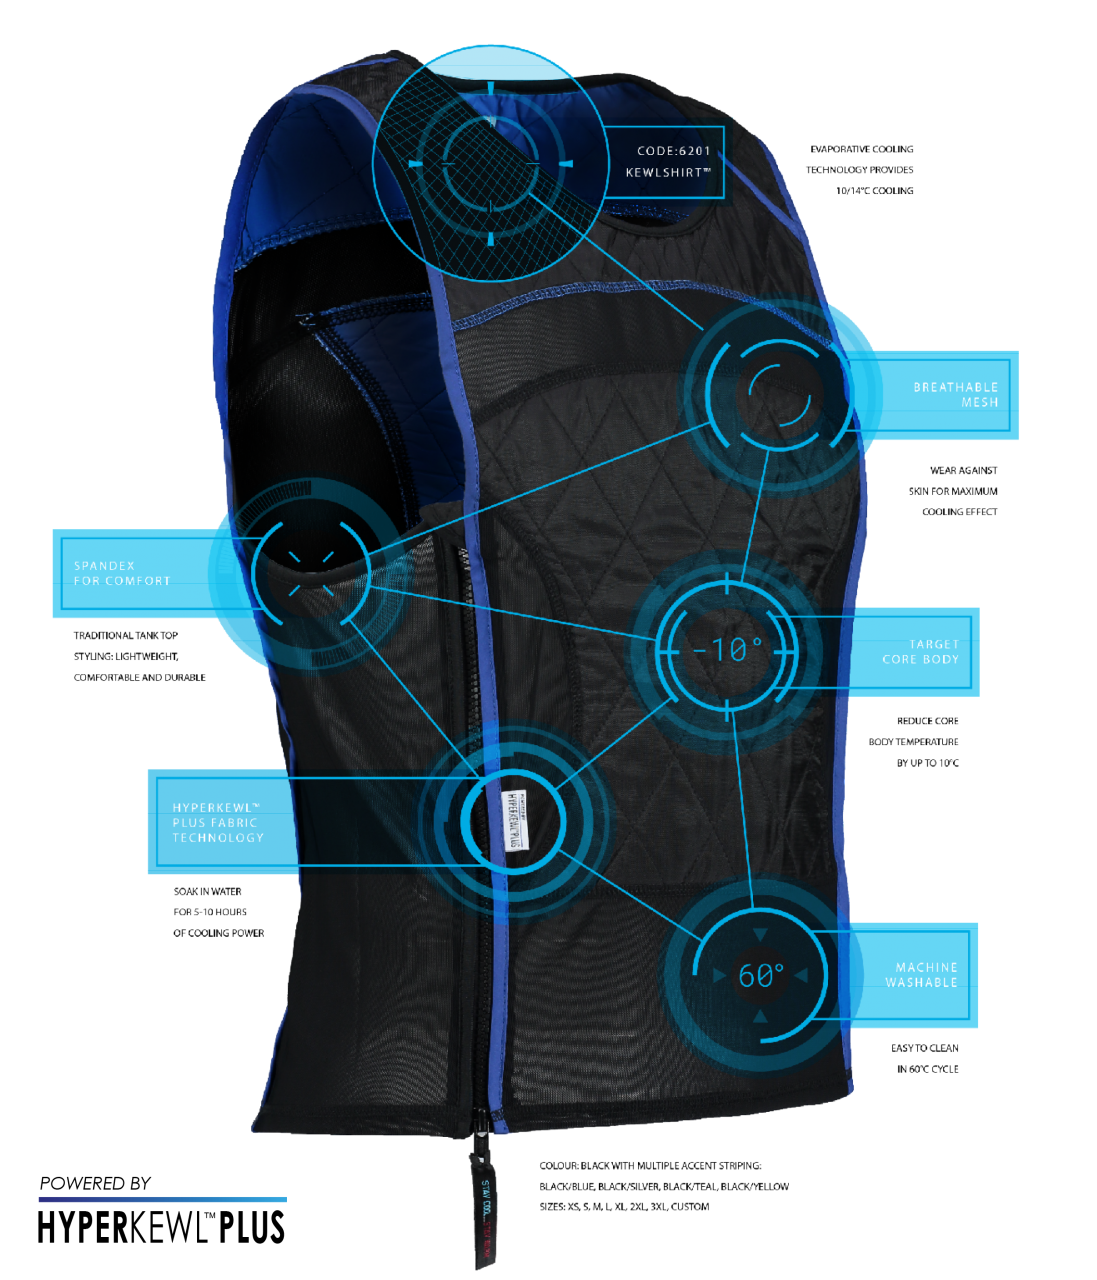 Image showing technical qualities of the Hyperkewl Plus cooling vest